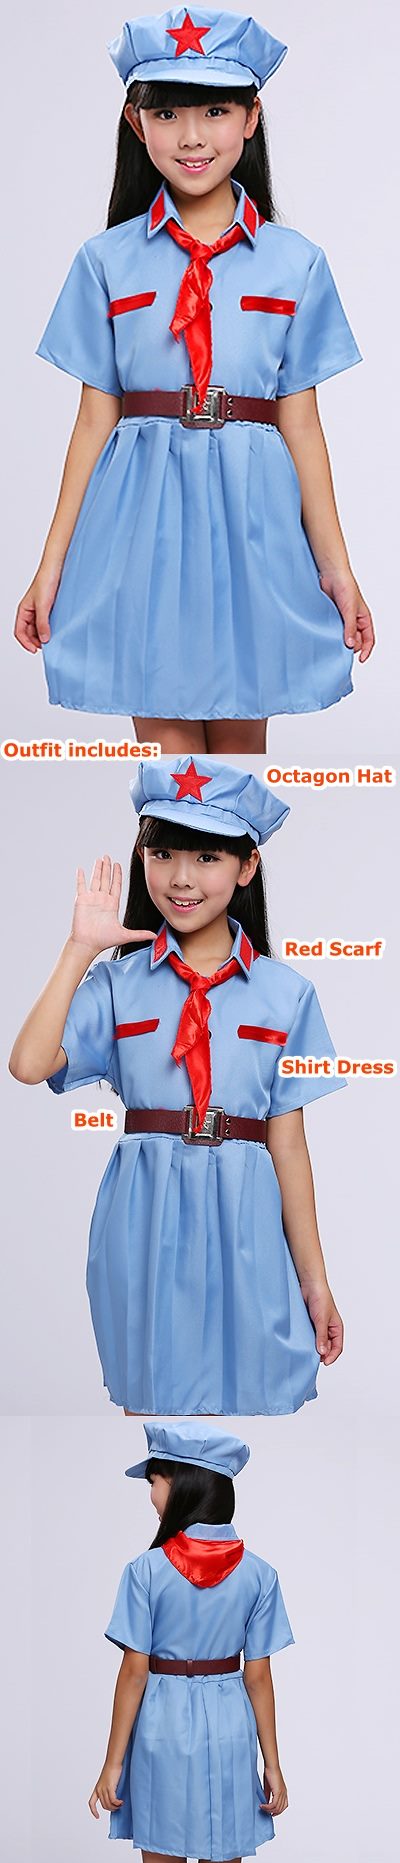 Grils' People's Liberation Army / Red Guard Outfit (Blue)